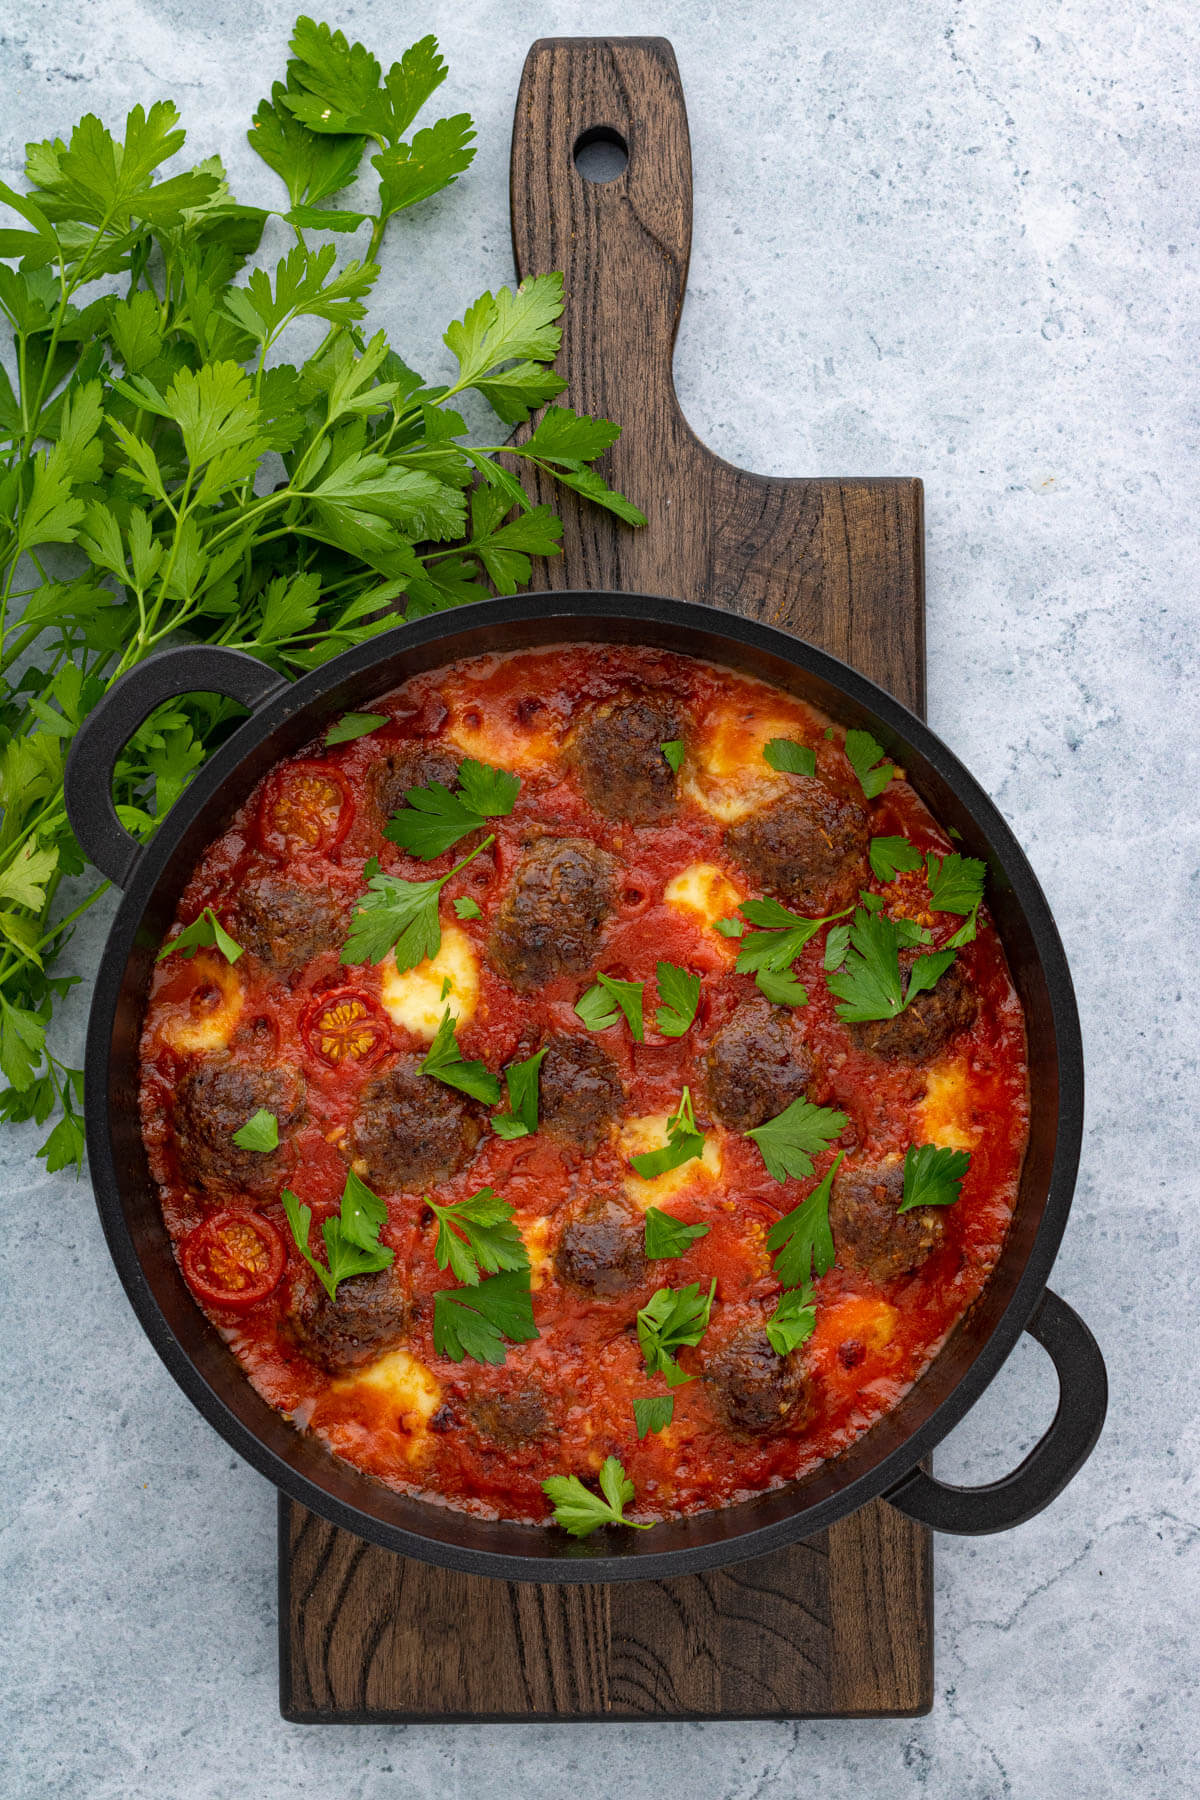 A pan of Oven Baked Meatballs in a rich tomato sauce with melted cheese garnished with Italian parsley.